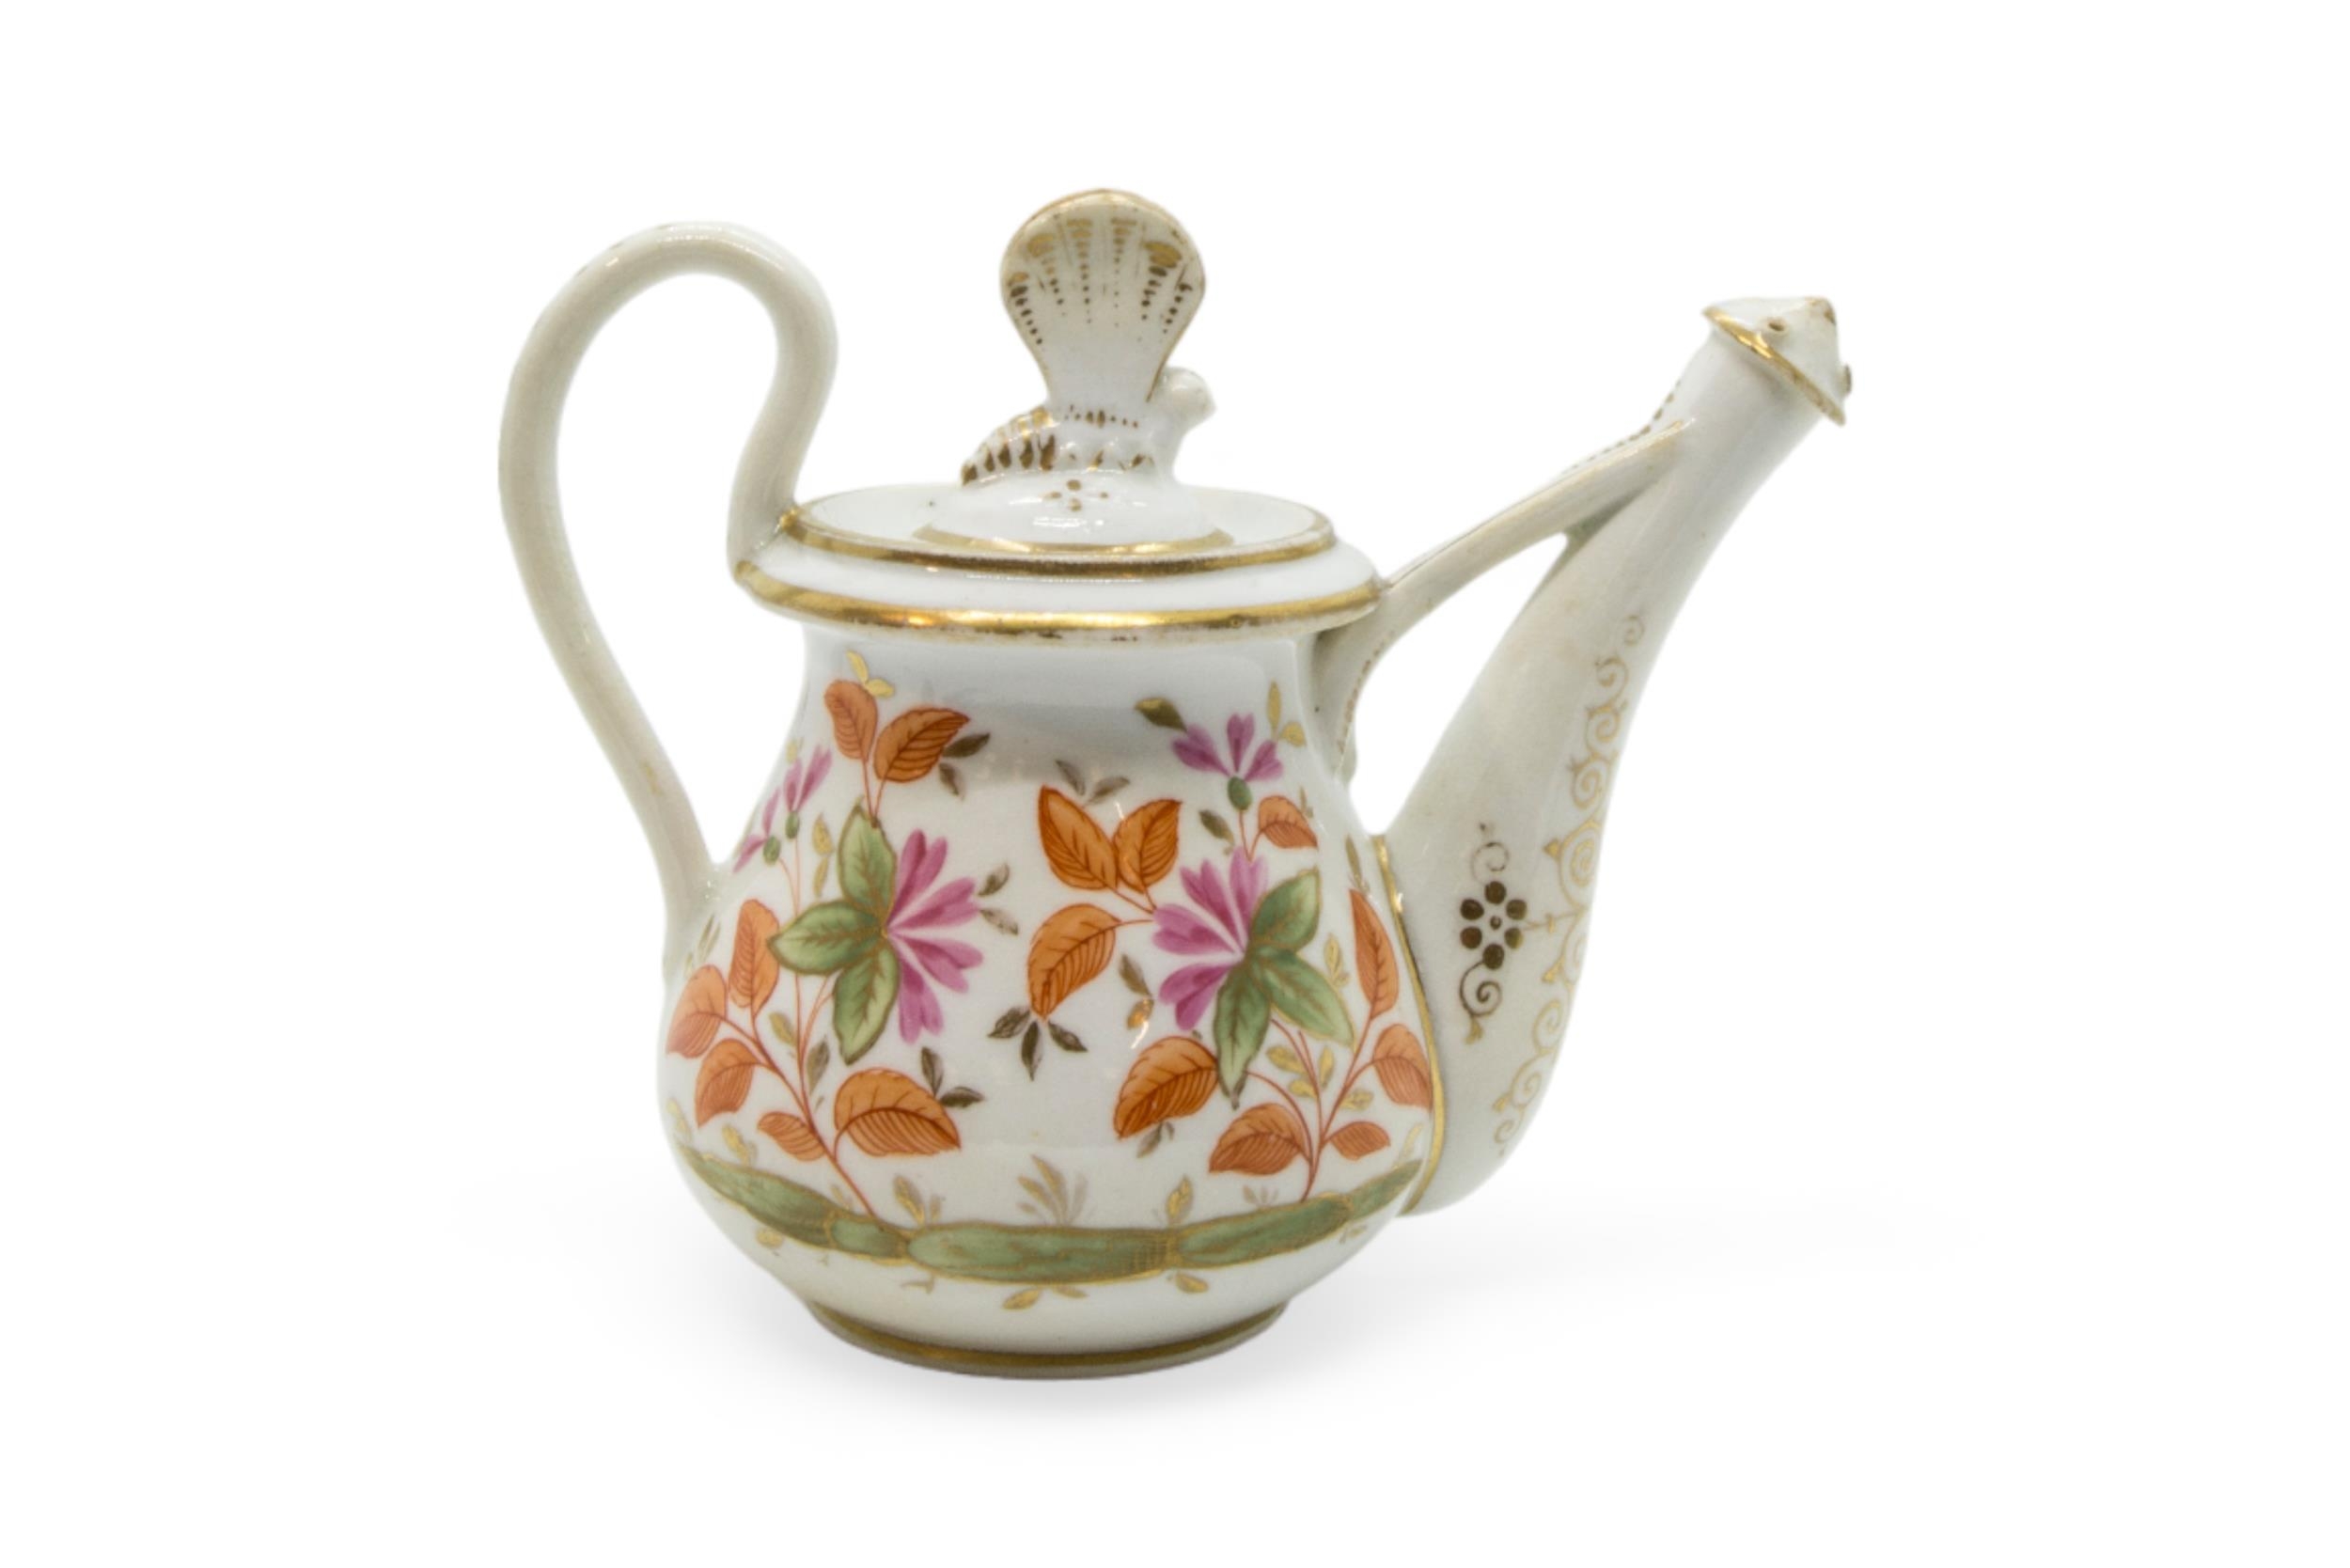 A ROSEWATER CONTAINER OF WATERING CAN FORM Early 19th century, probably Davenport, 9cms high - Image 2 of 8